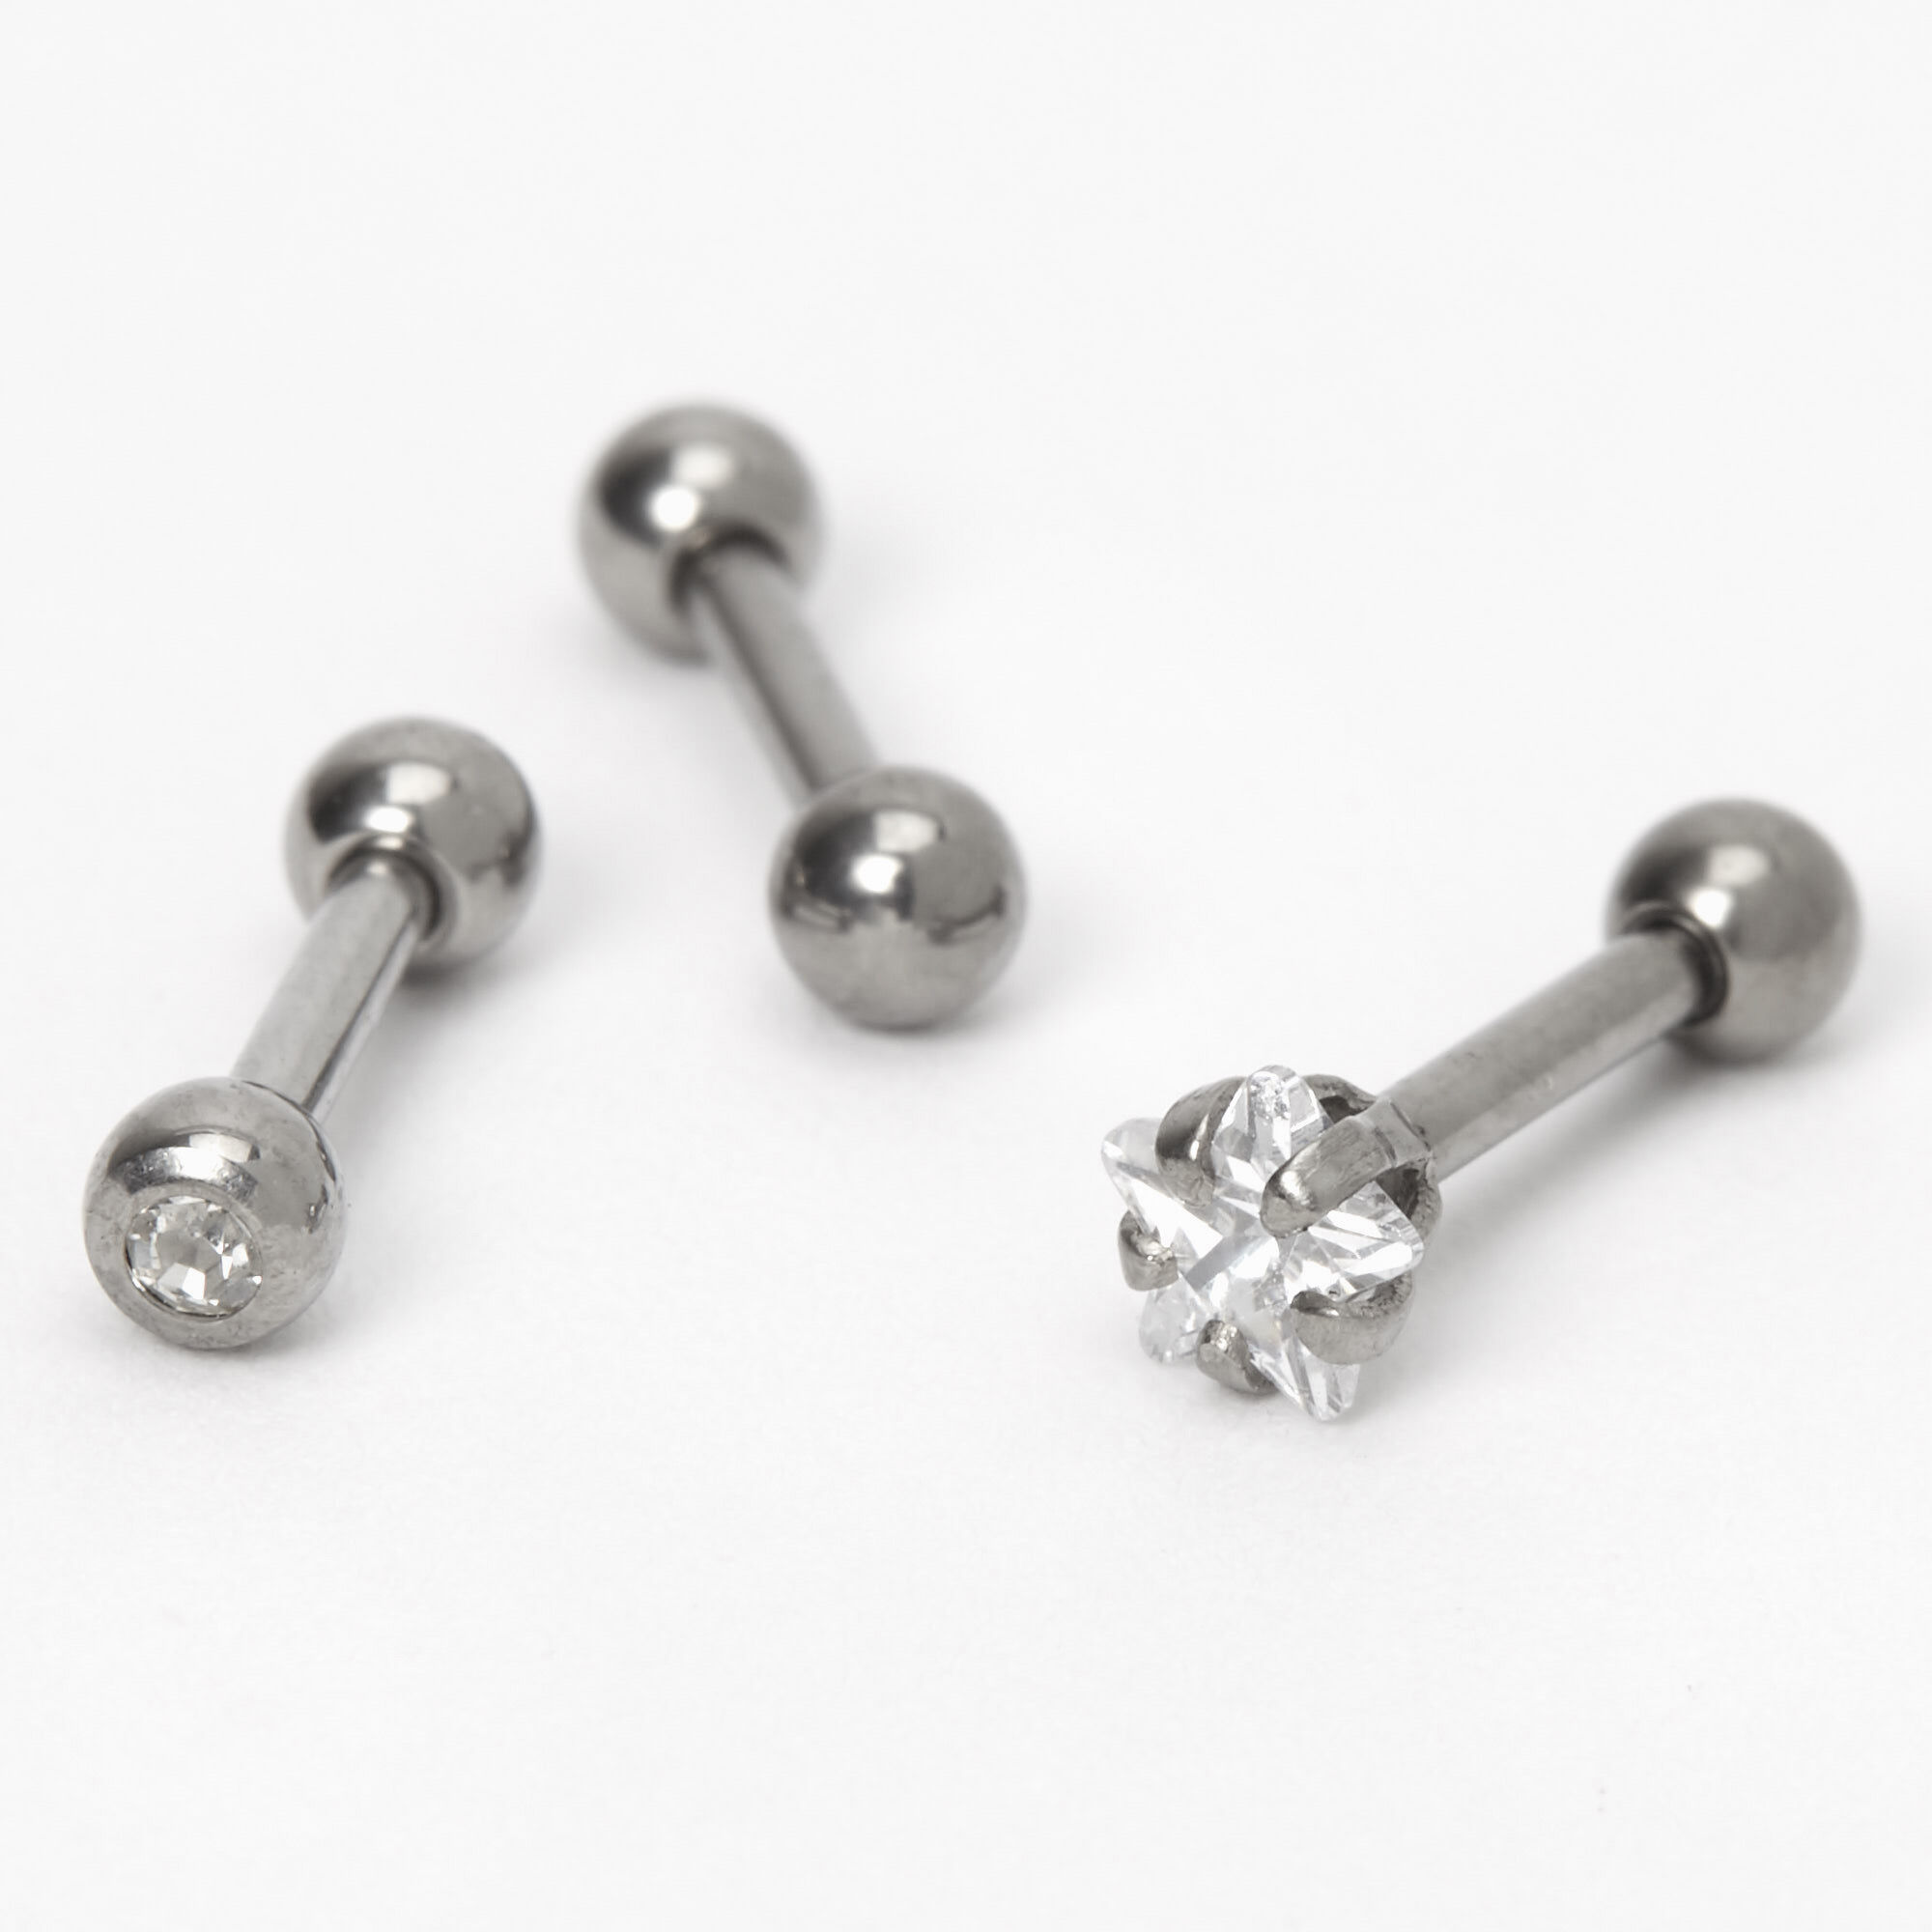 View Claires Tone Titanium 16G Crystal Star Cartilage Stud Earrings 3 Pack Silver information